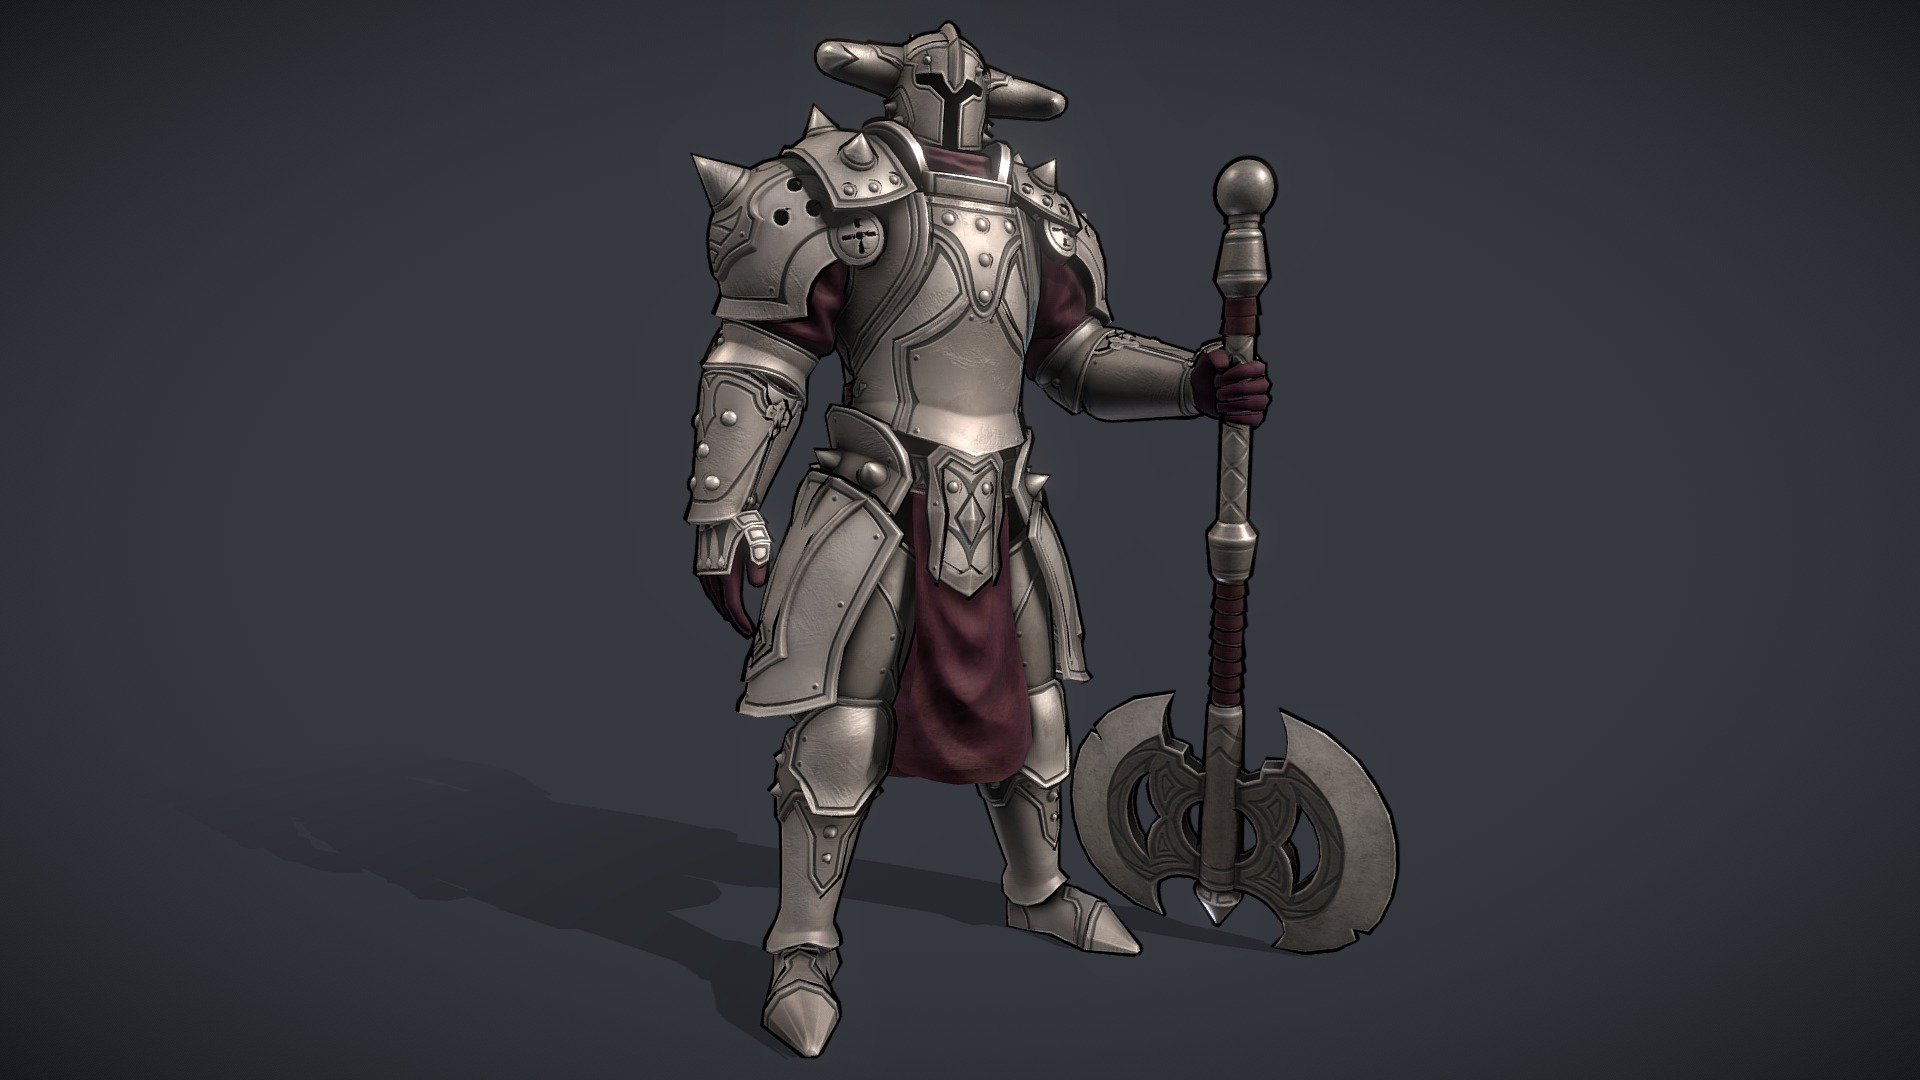 This ones a personal project, Used this epic work for ref: https://www.artstation.com/artwork/4bqVNl

Modelled Low and high poly, unwrapped in Maya.&ndash;
Textured in Substence Painter.&ndash;
Rigged in Maya.

Art Station:https://www.artstation.com/arthurkrut - Bulky Knight - Download Free 3D model by Arthur Krut (@OptiCube) 3d model